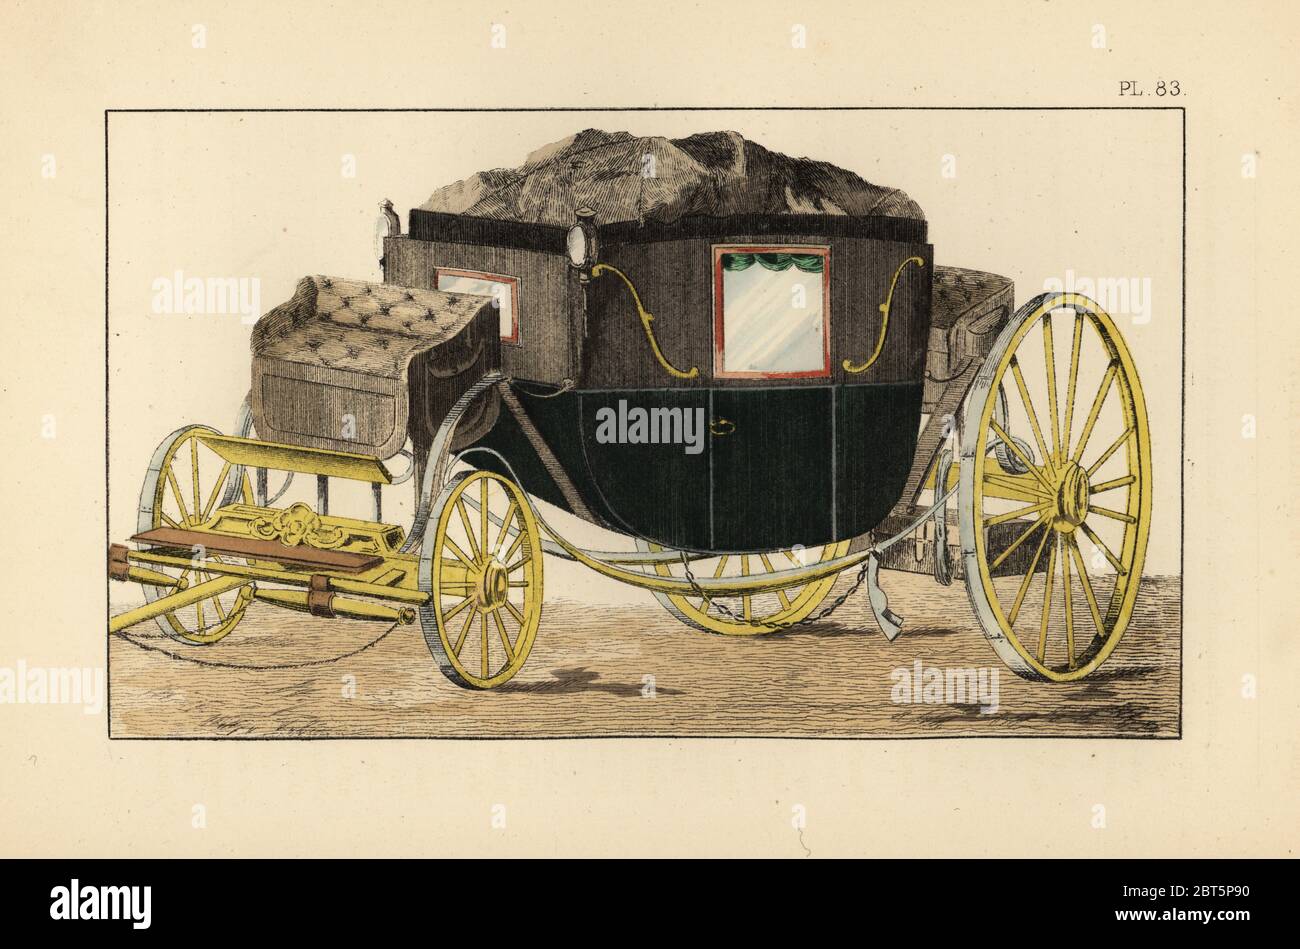 Marie Antoinettes four-wheel Berlin carriage for the flight to Varennes. Berline du voyage de Varennes. Hand-coloured lithograph from Fashions and Customs of Marie Antoinette and her Times, by Le Comte de Reiset, Paris, 1885. The journal of Madame Eloffe, dressmaker and linen-merchant to the Queen and ladies of the court. Stock Photo